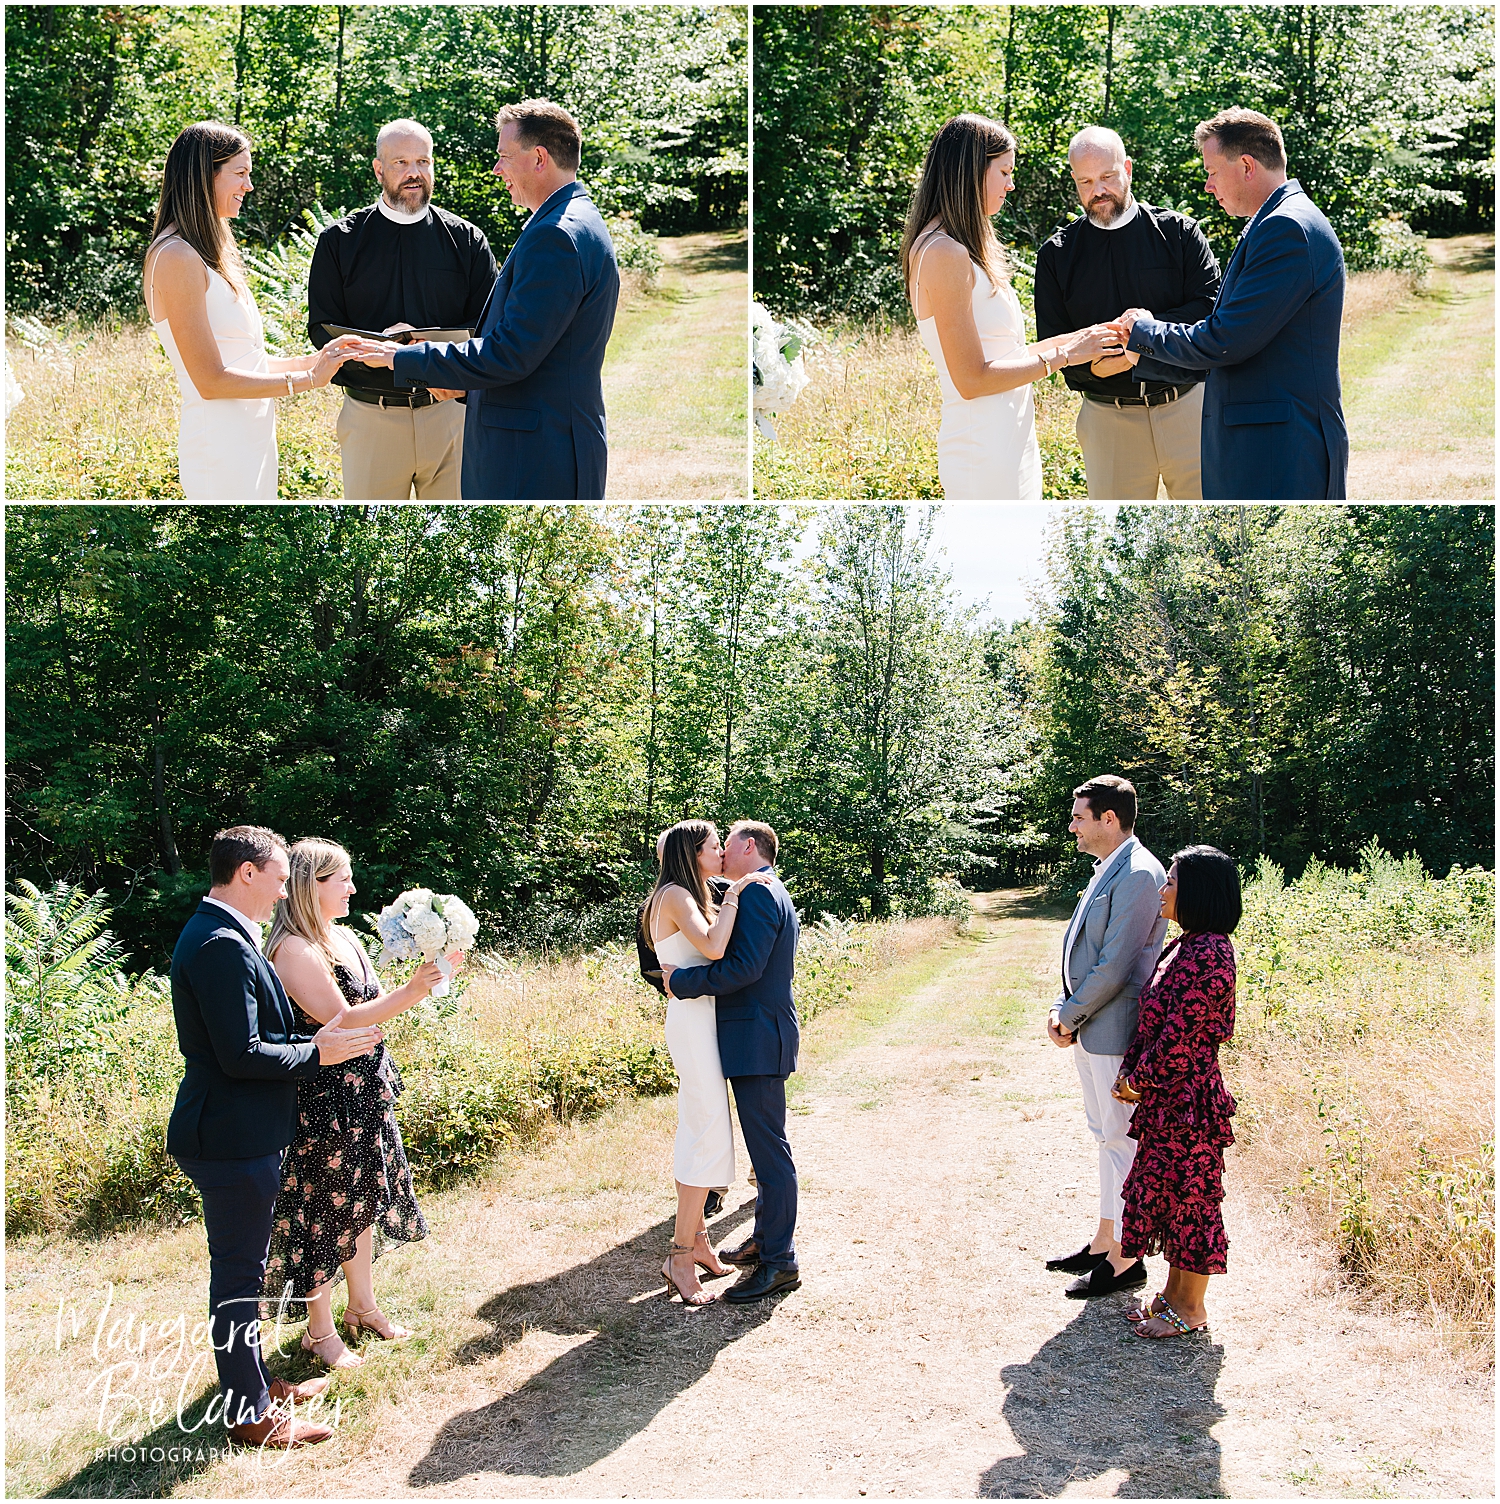 A collage of an outdoor wedding ceremony with a couple exchanging vows and rings, followed by a kiss, in the presence of an officiant and a small number of guests.